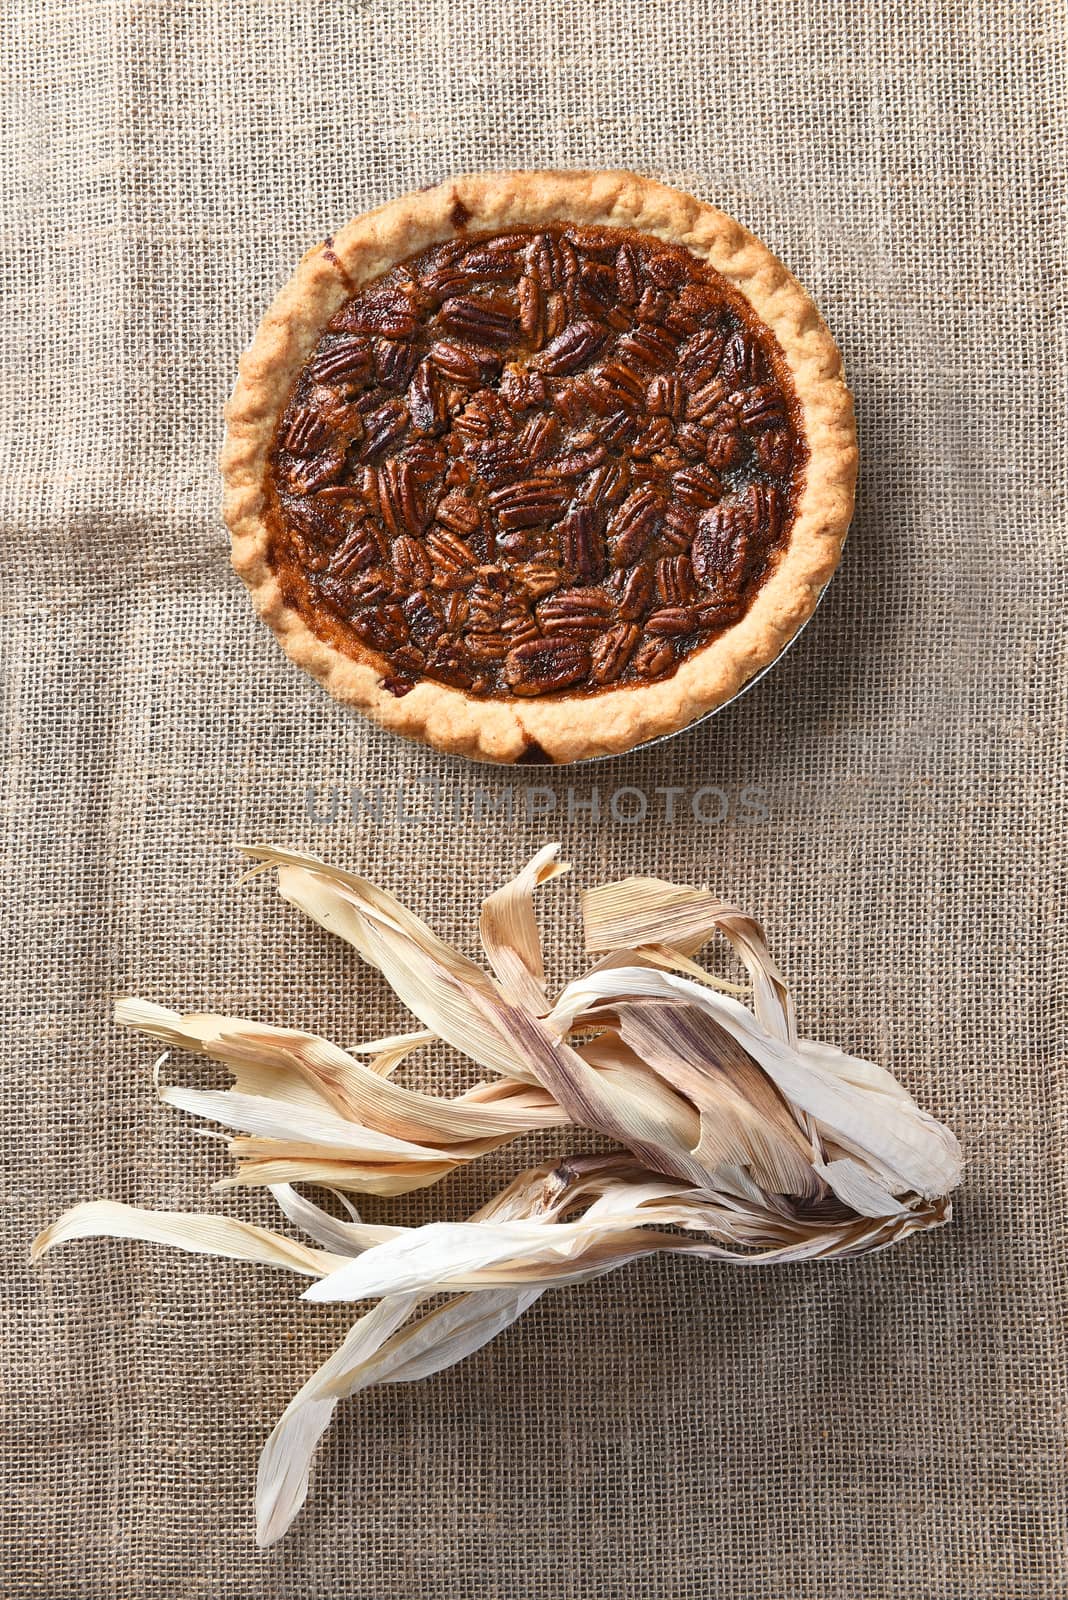 Vertical high angle view of a pecan pie on burlap with corn husks.